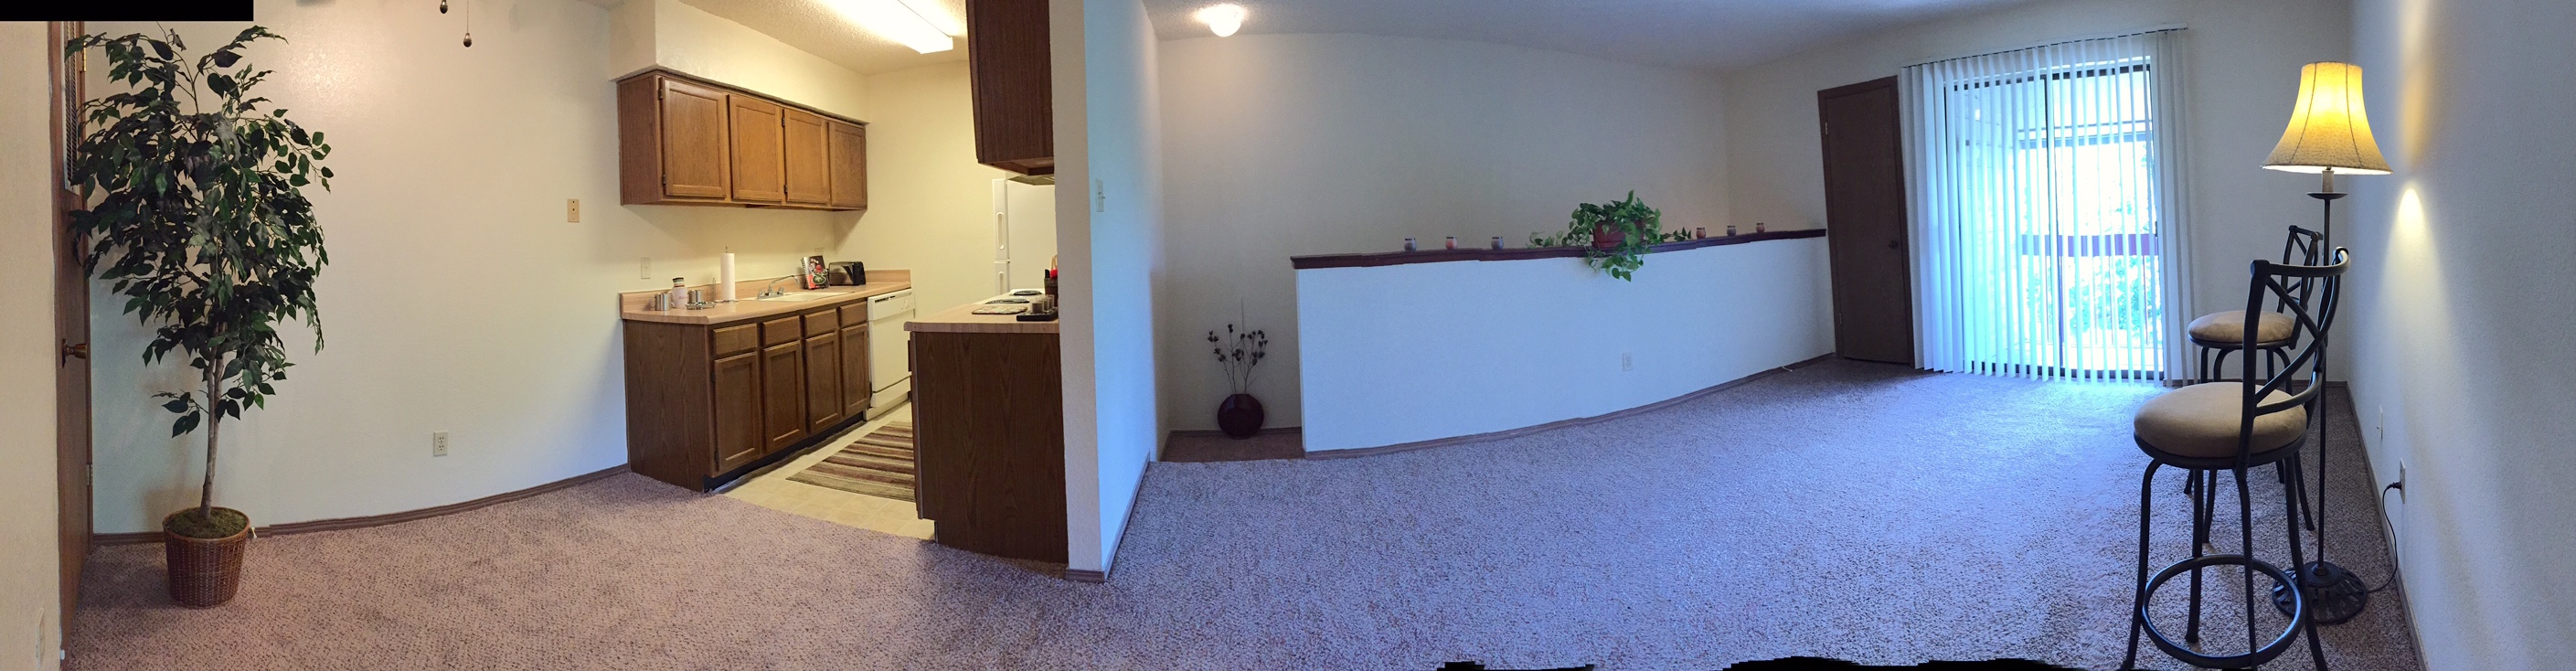 Panoramic - Kitchen, Dining, Living Rooms